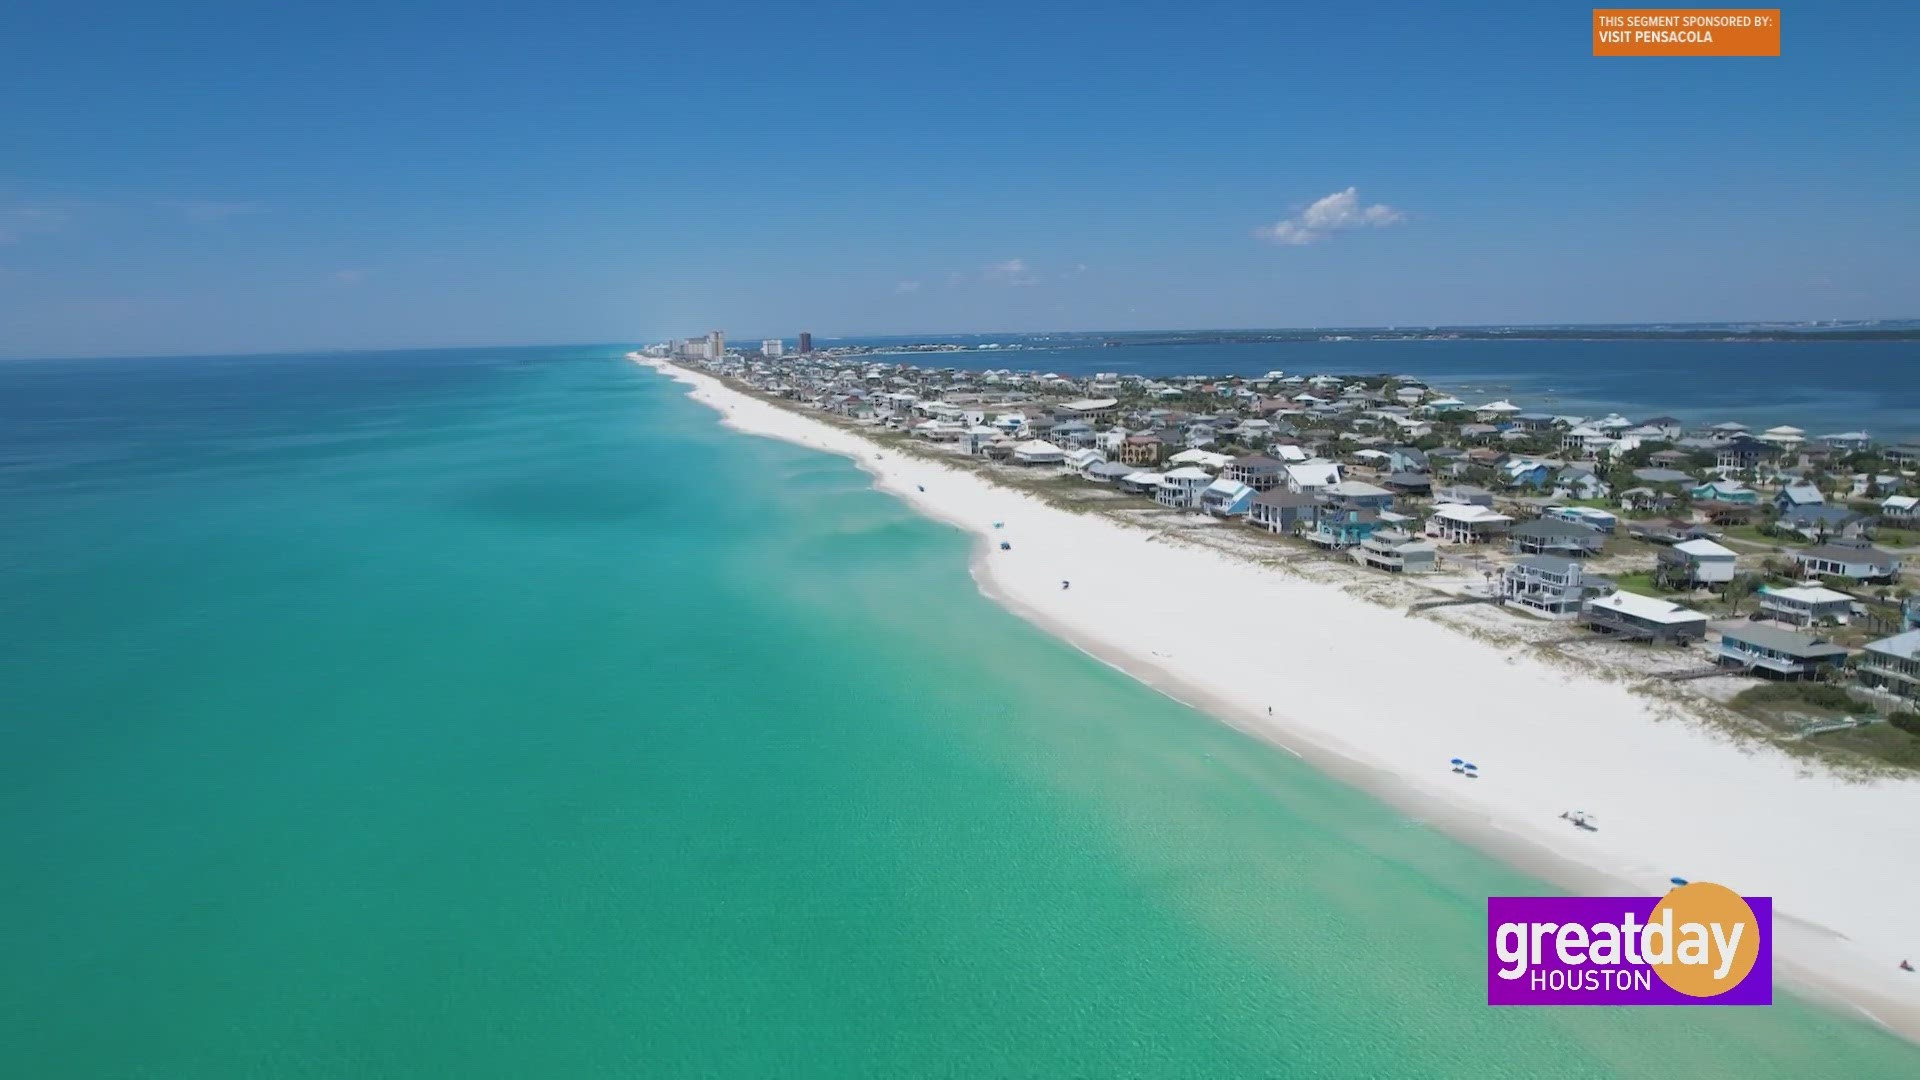 Pensacola, FL is the way to beach, but there is so much more than the beach! Nicole Stacey with Visit Pensacola" shares details on Pensacola's attractions